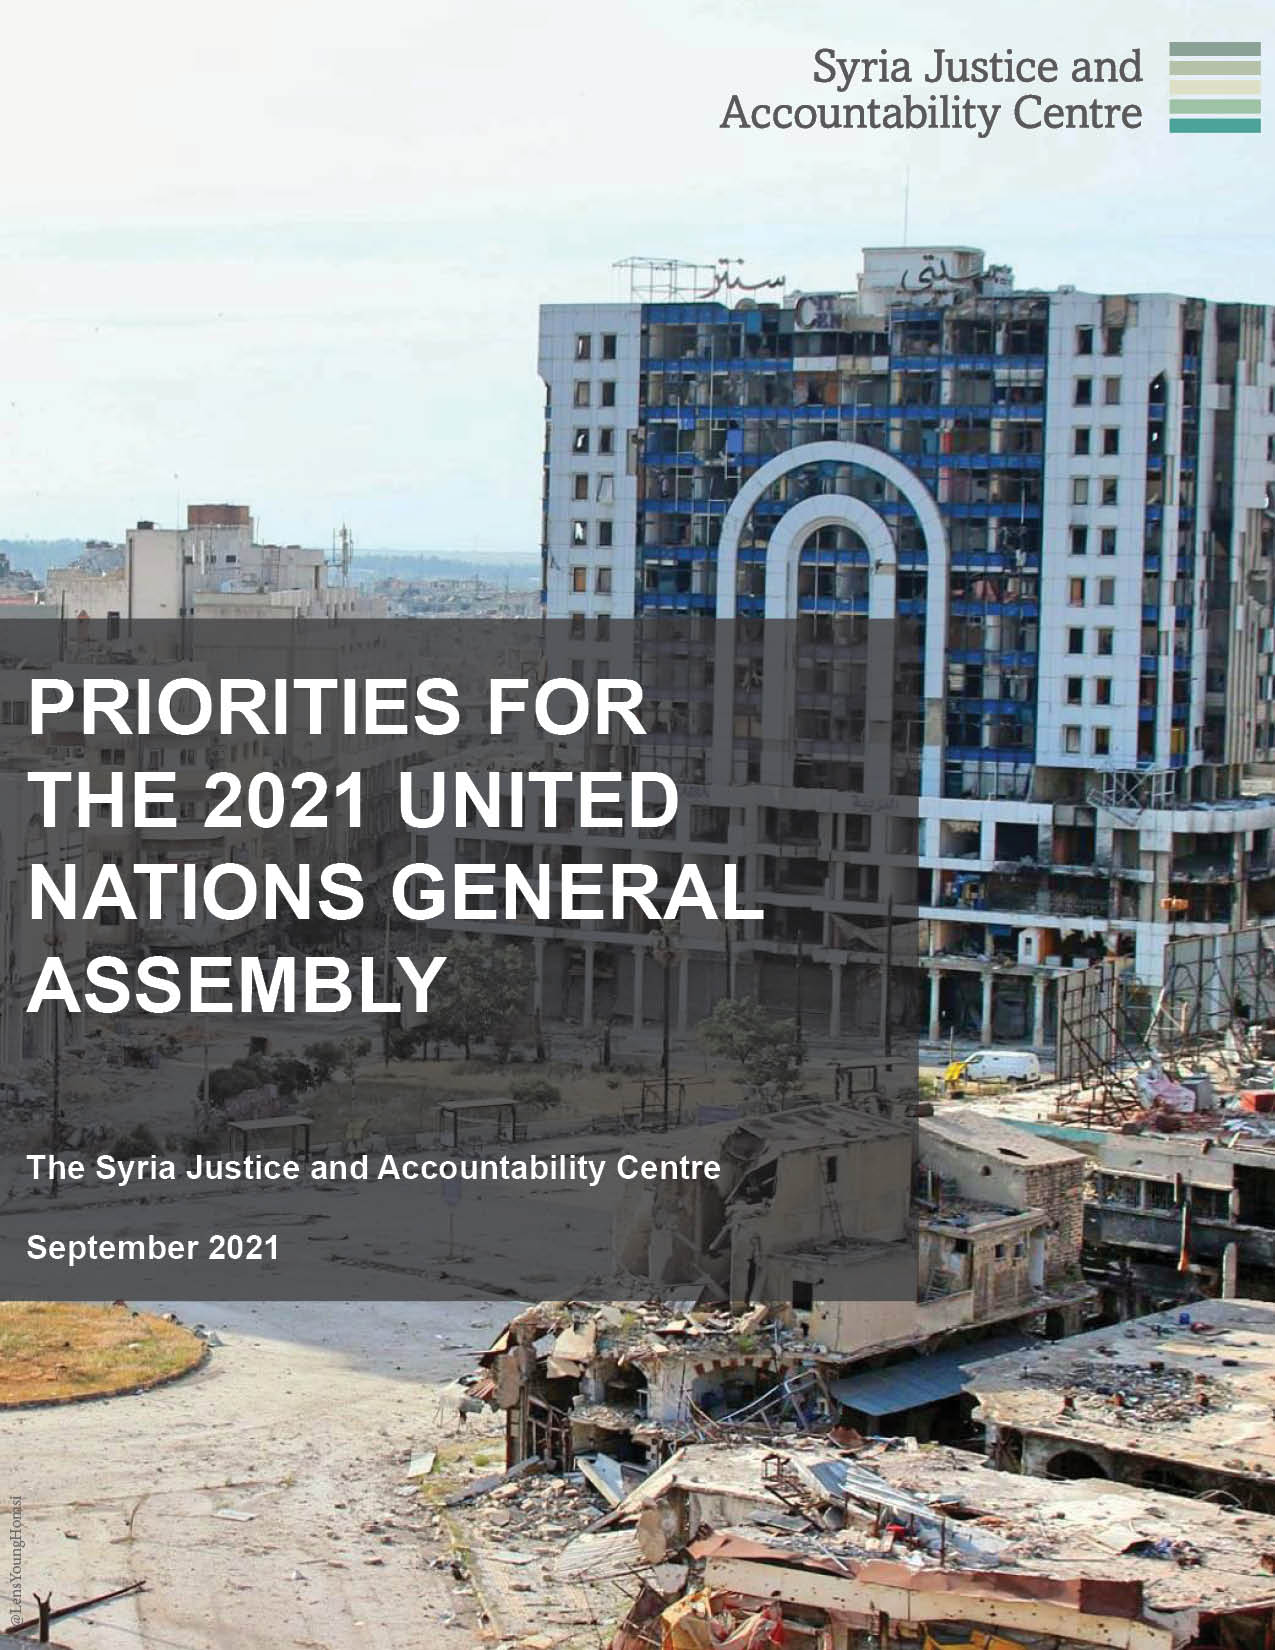 Priorities for the 2021 United Nations General Assembly